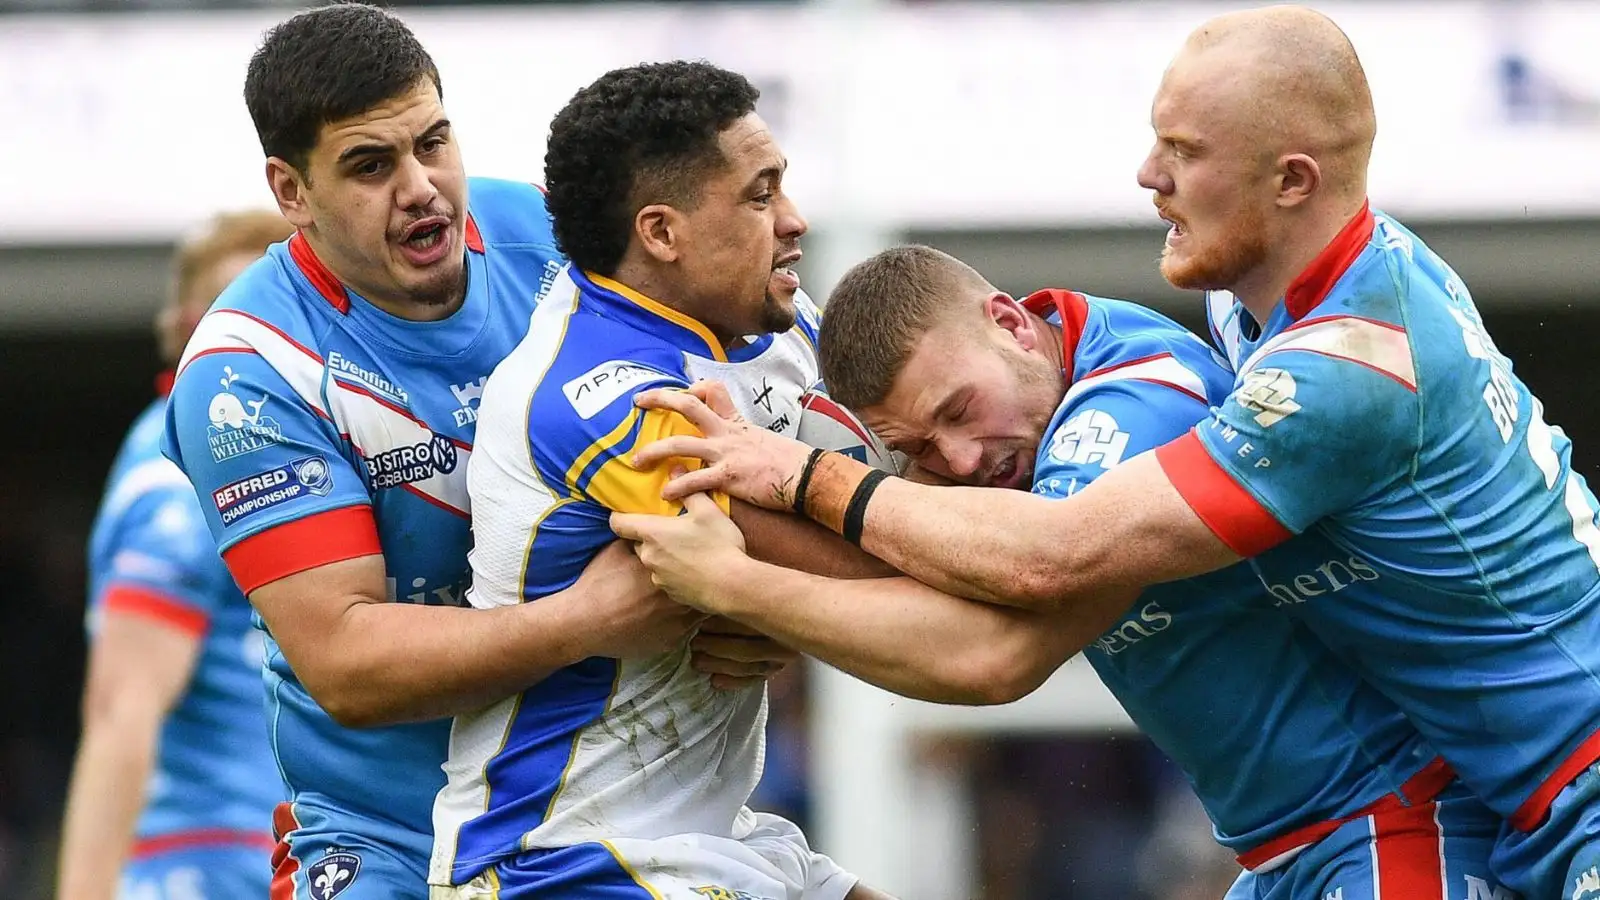 Out of favour Leeds Rhinos winger Derrell Olpherts makes permanent Championship move